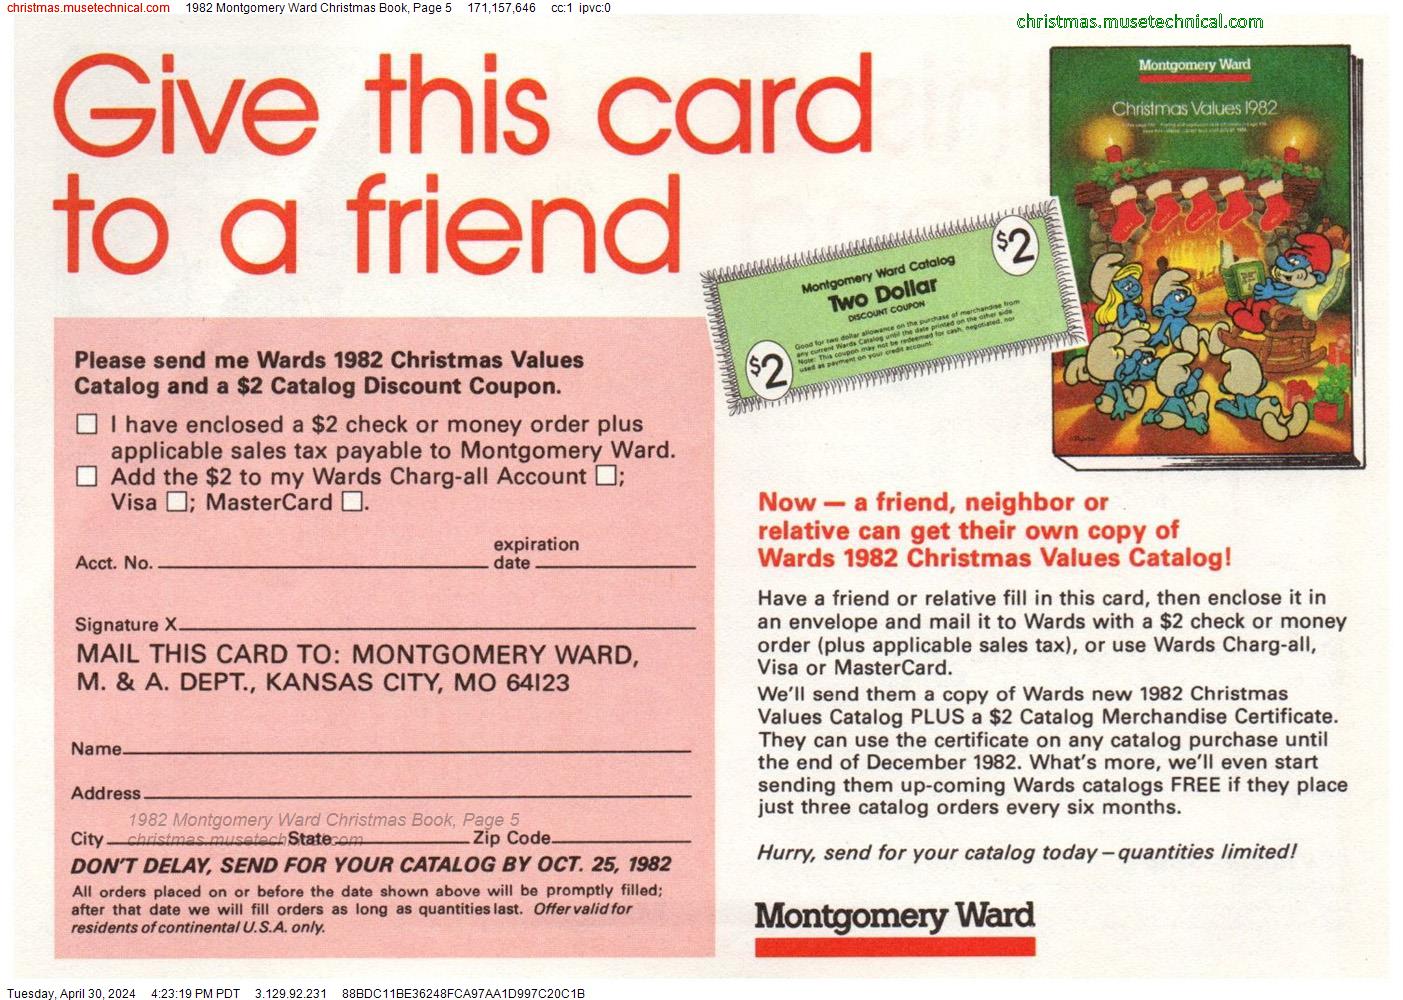 1982 Montgomery Ward Christmas Book, Page 5